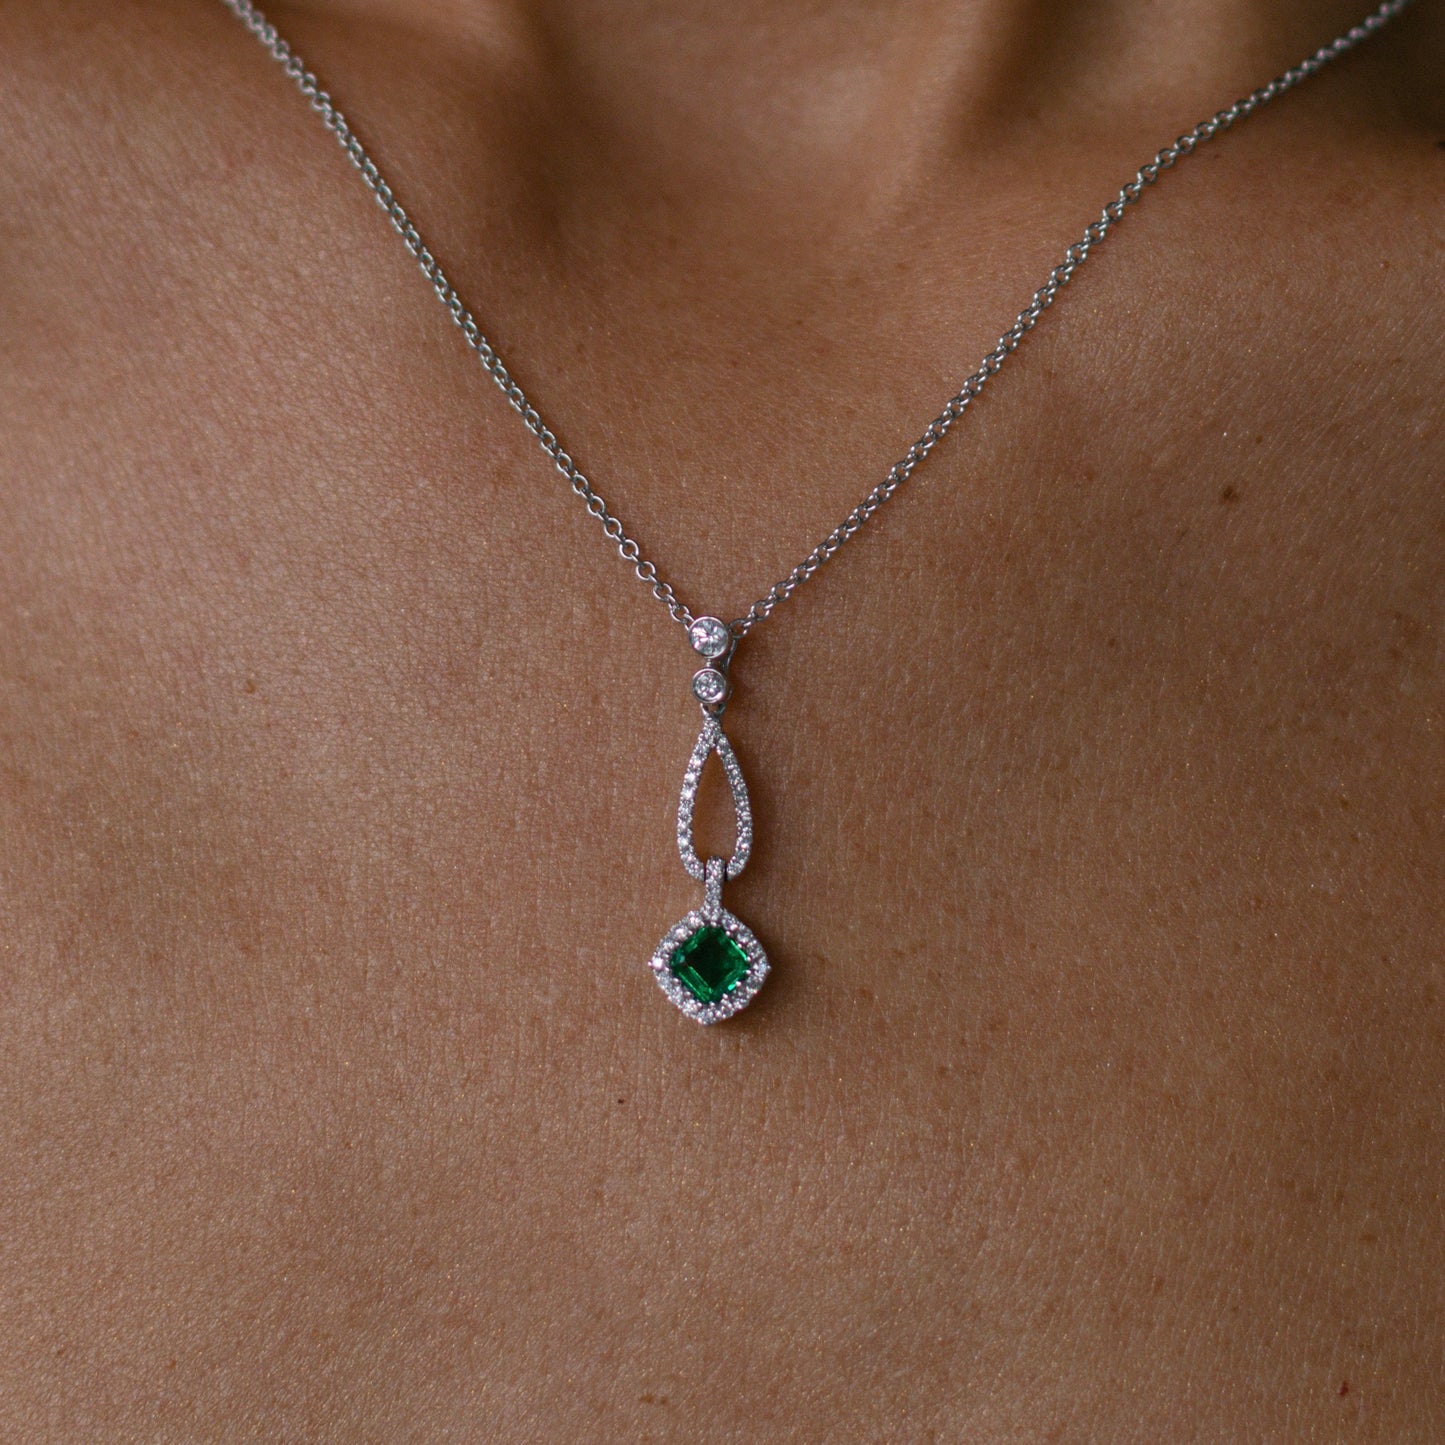 The Emerald Drop Necklace